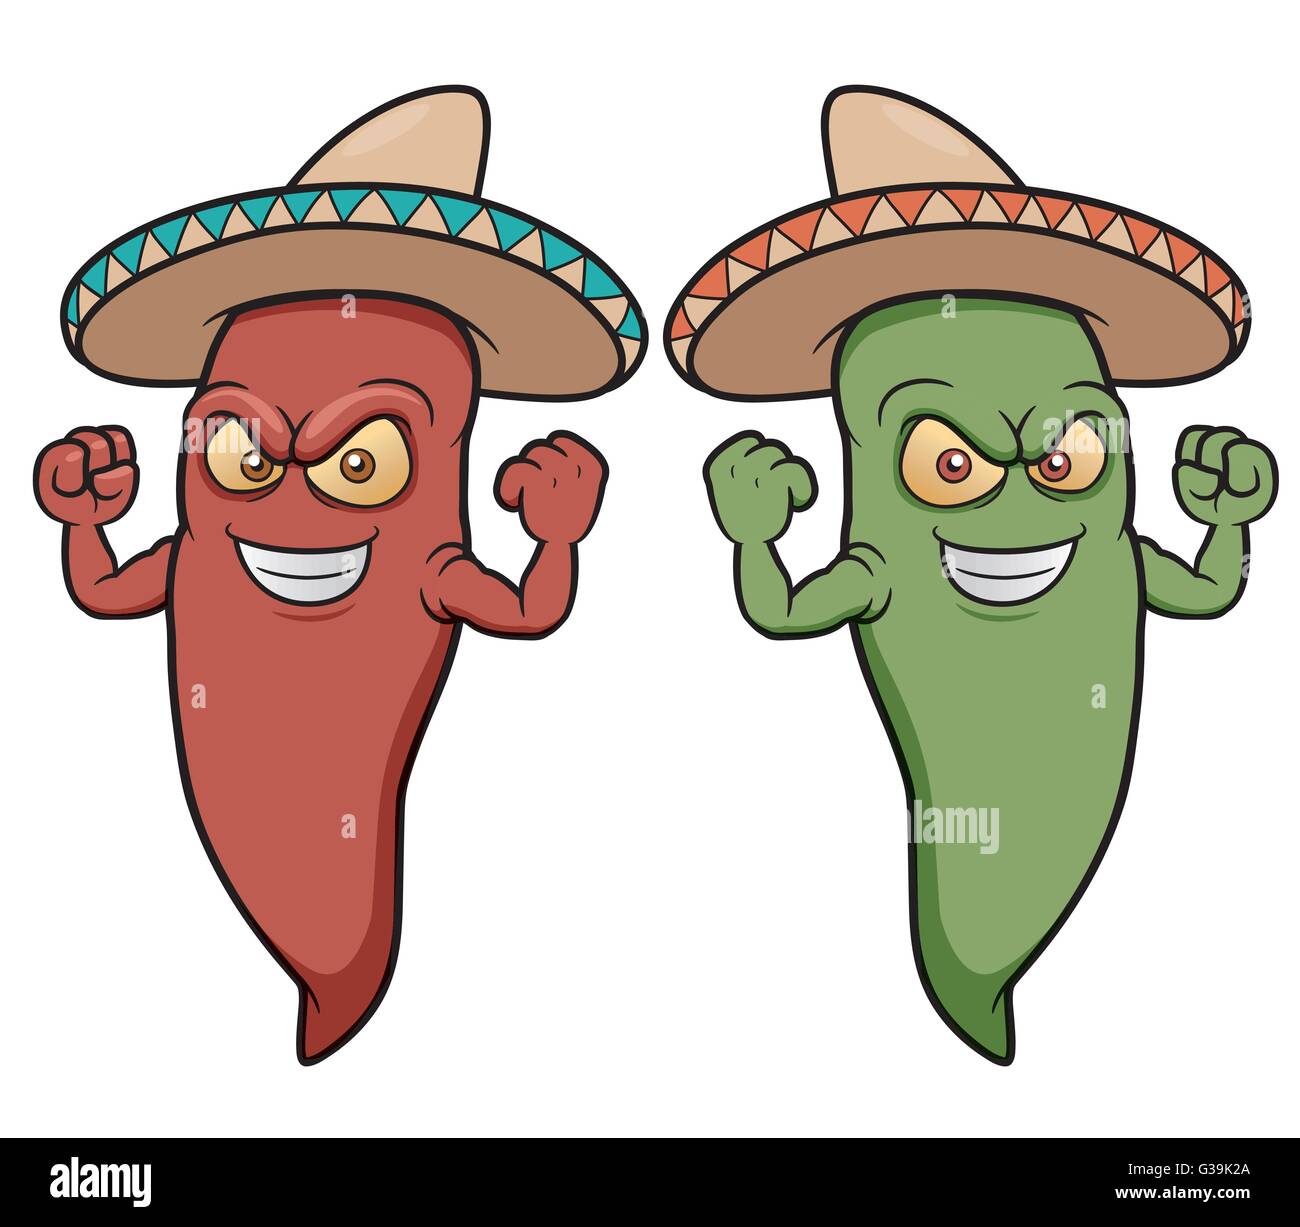 Vector illustration of Cartoon Chili peppers wearing sombreros Stock Vector